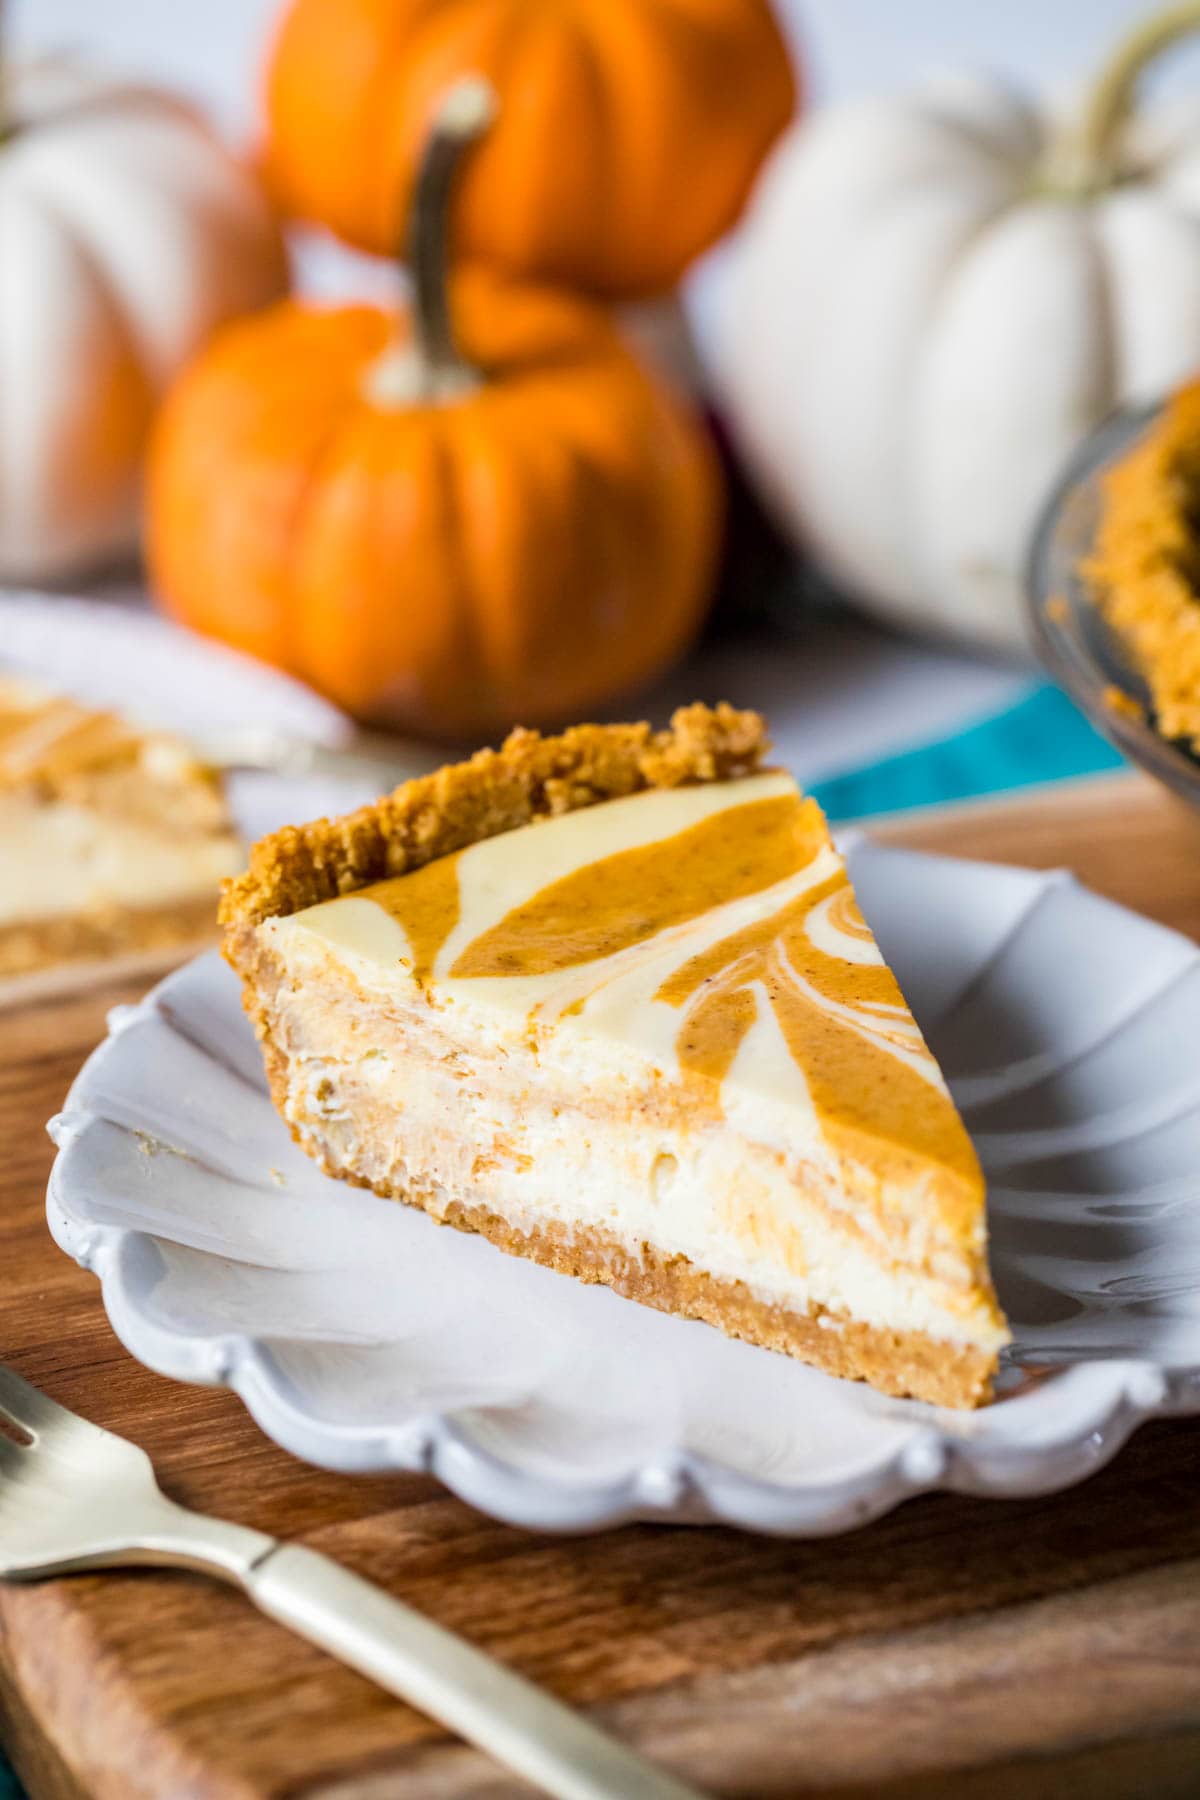 Slice of a swirled pumpkin pie and cheesecake hybrid on a plate.